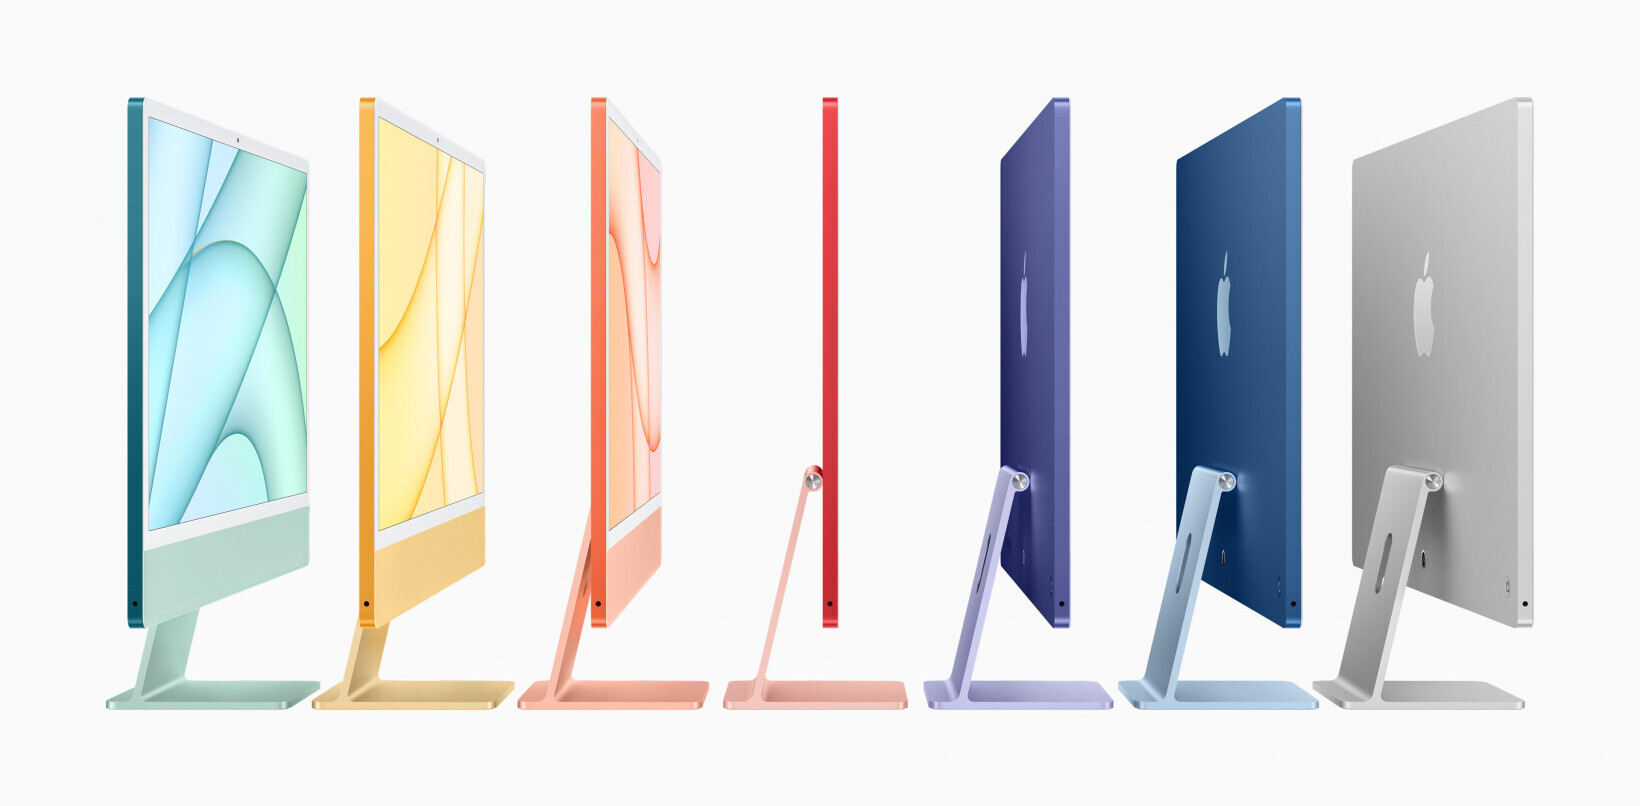 The slim new iMac is powered by M1 and comes in 7 gorgeous colors